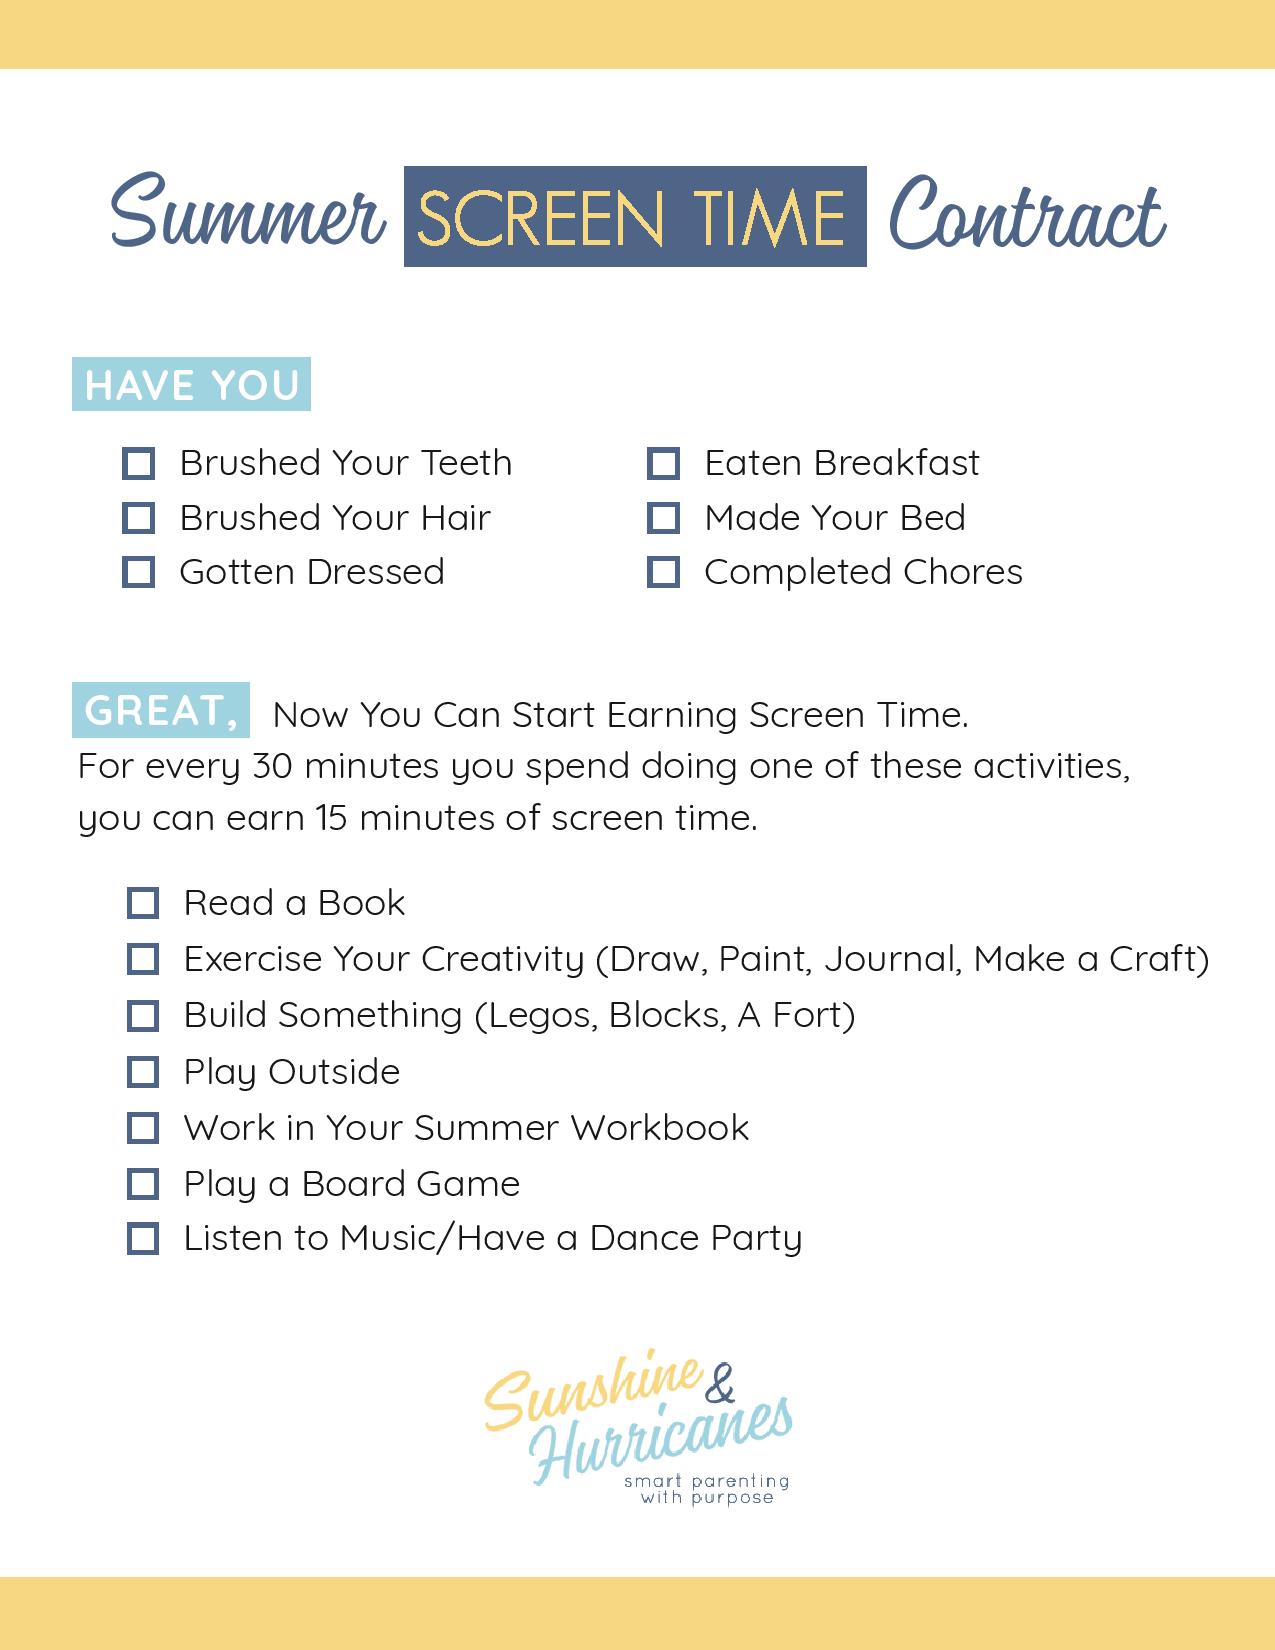 Summer Screen Time Contract